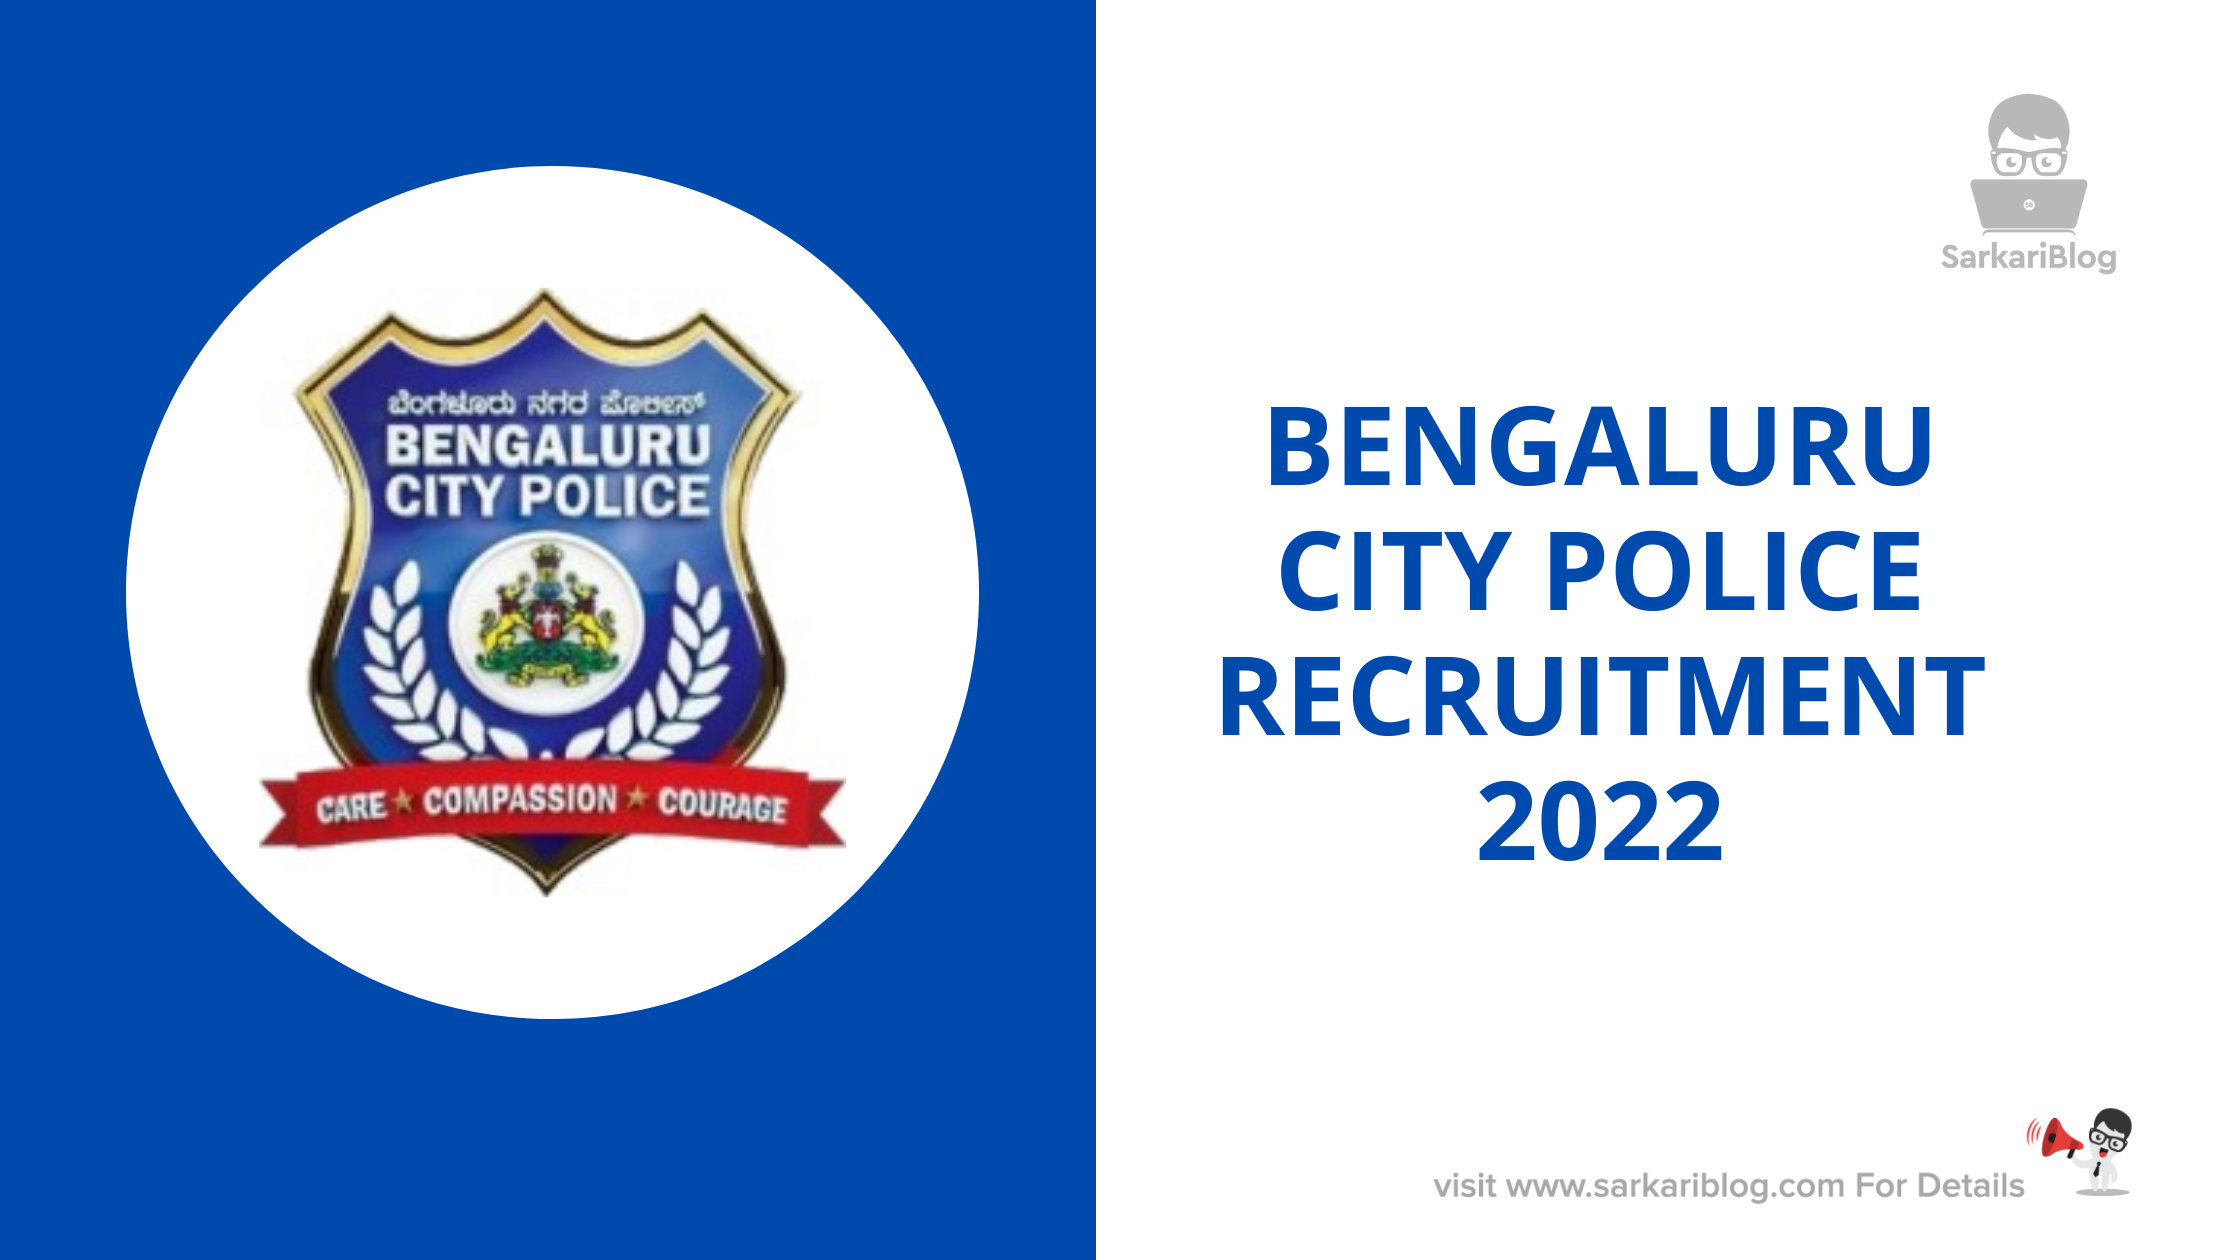 Bengaluru City Police Recruitment 2022 – Apply Online for 16 Cyber Security Analyst and Digital Forensic Analyst PostsALL INDIA JOBS Bengaluru City Police Recruitment 2022